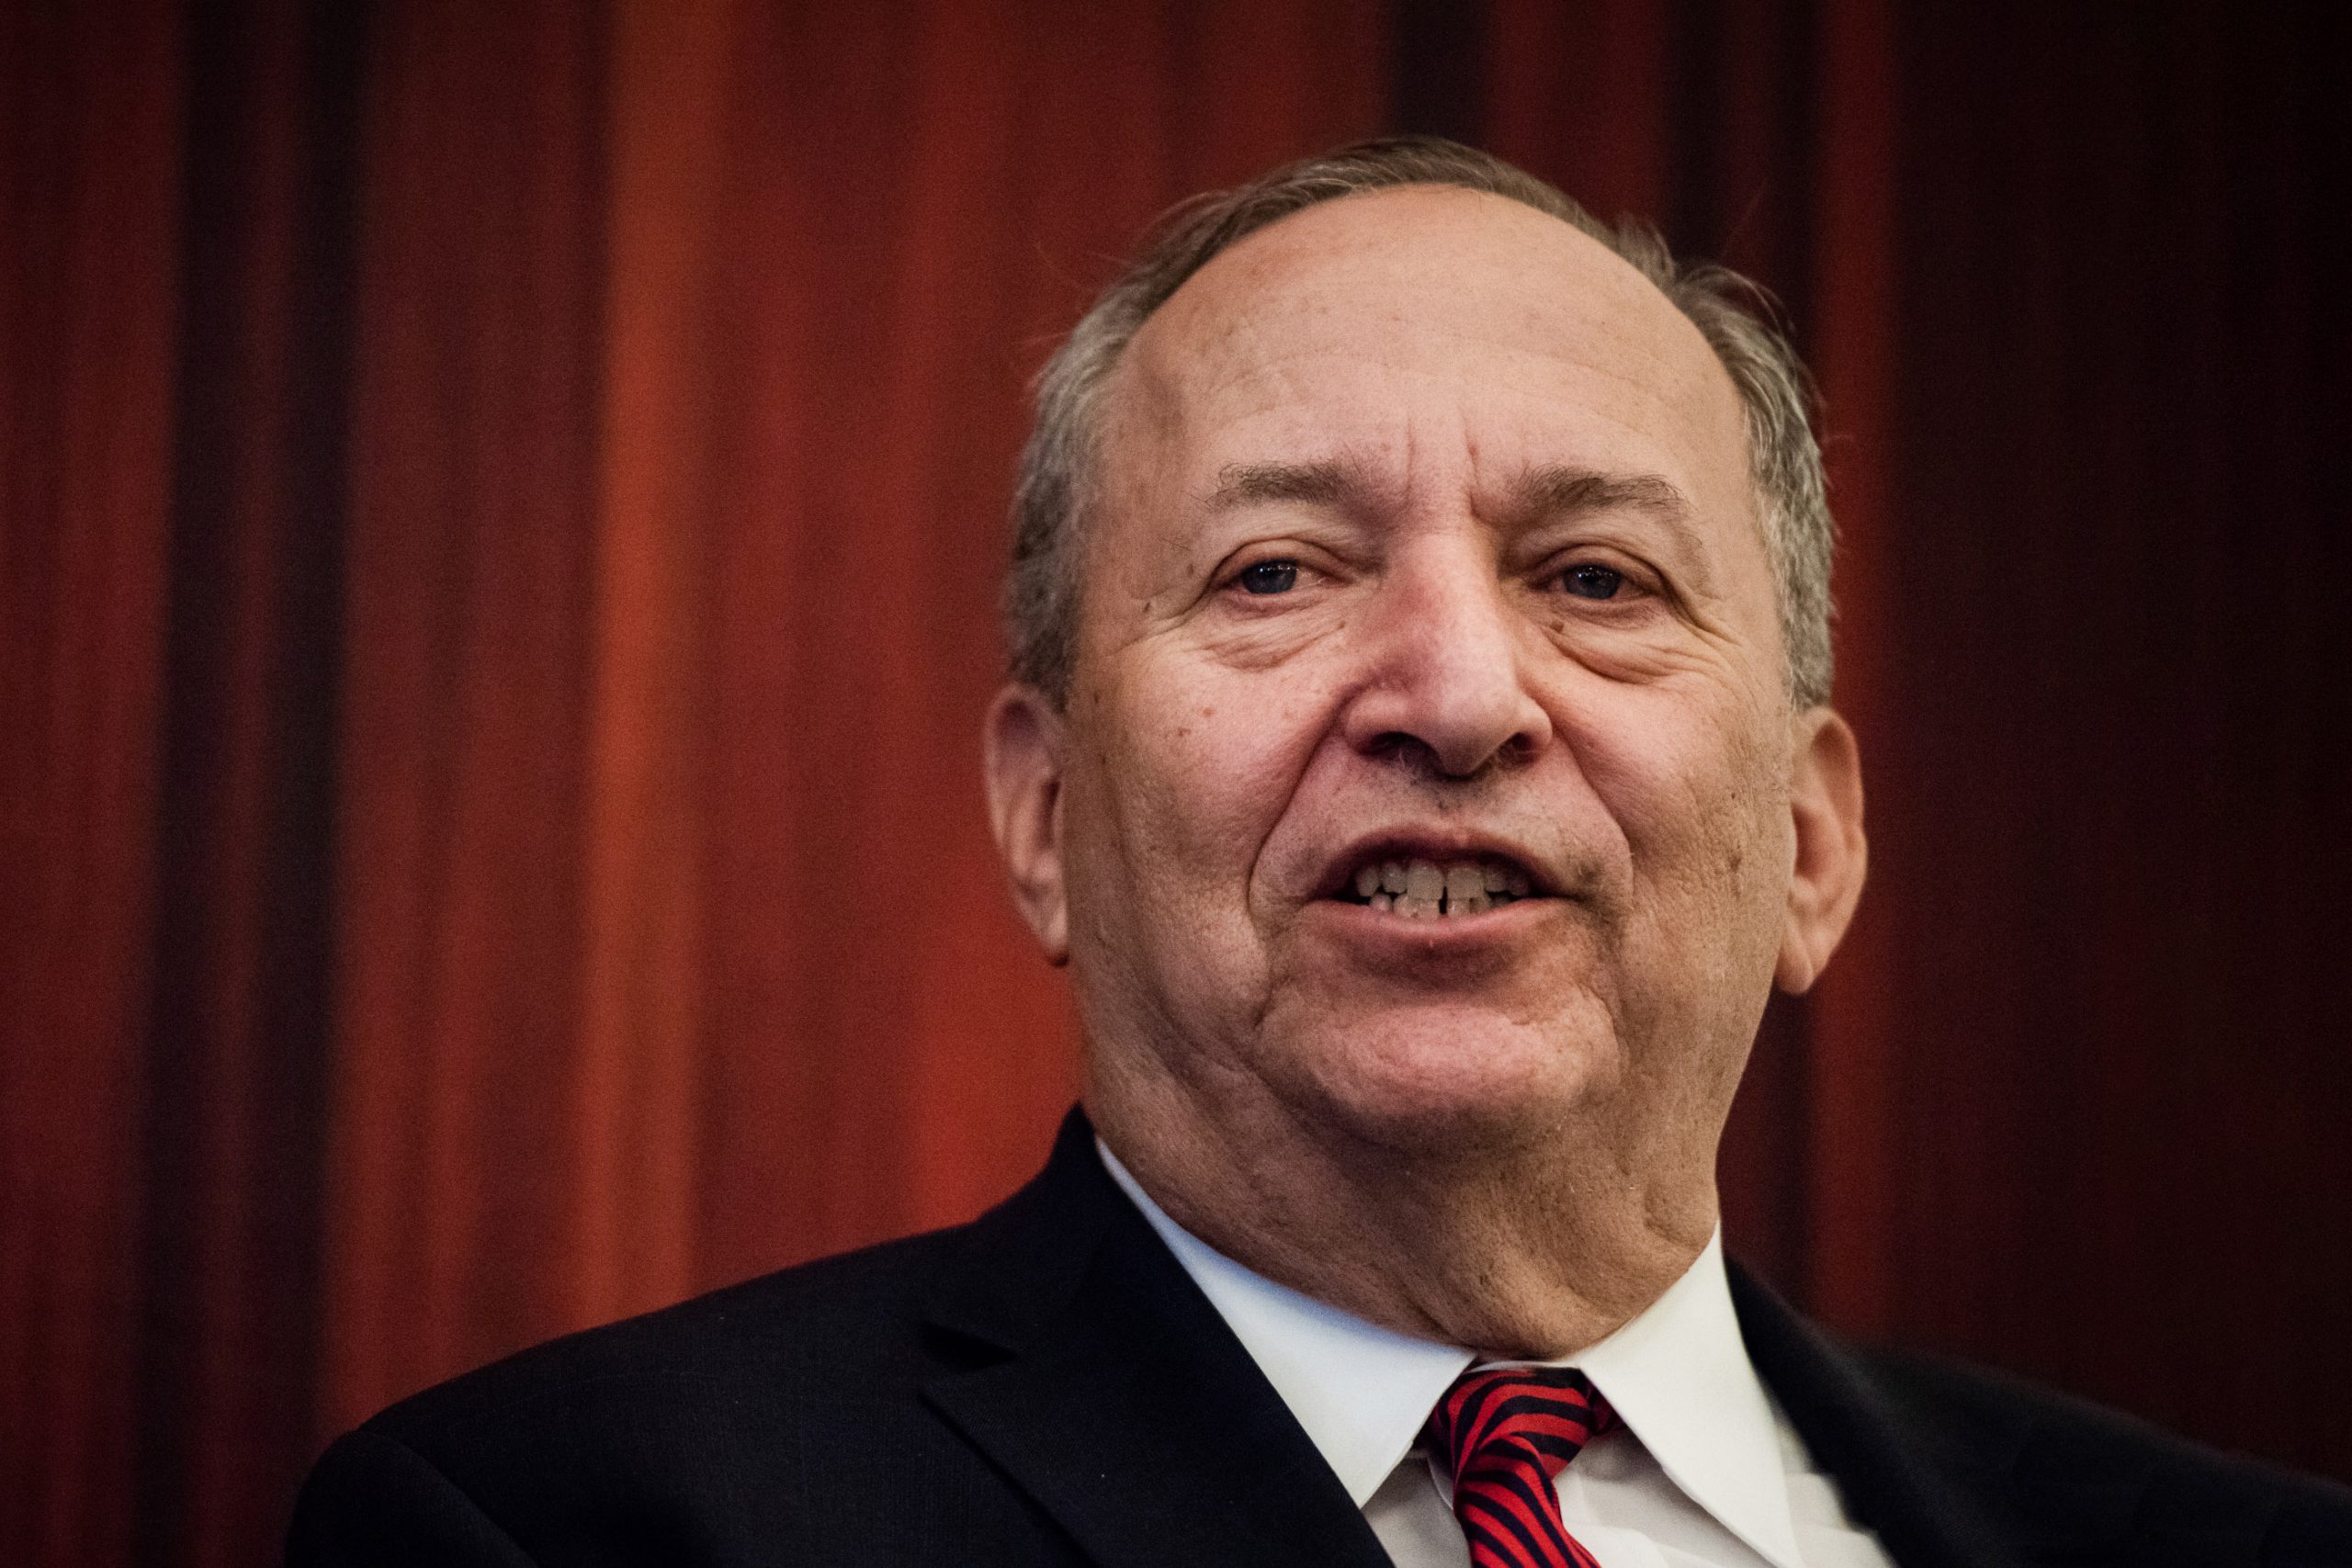 Larry Summers says a recession within the next two years is 'likely'